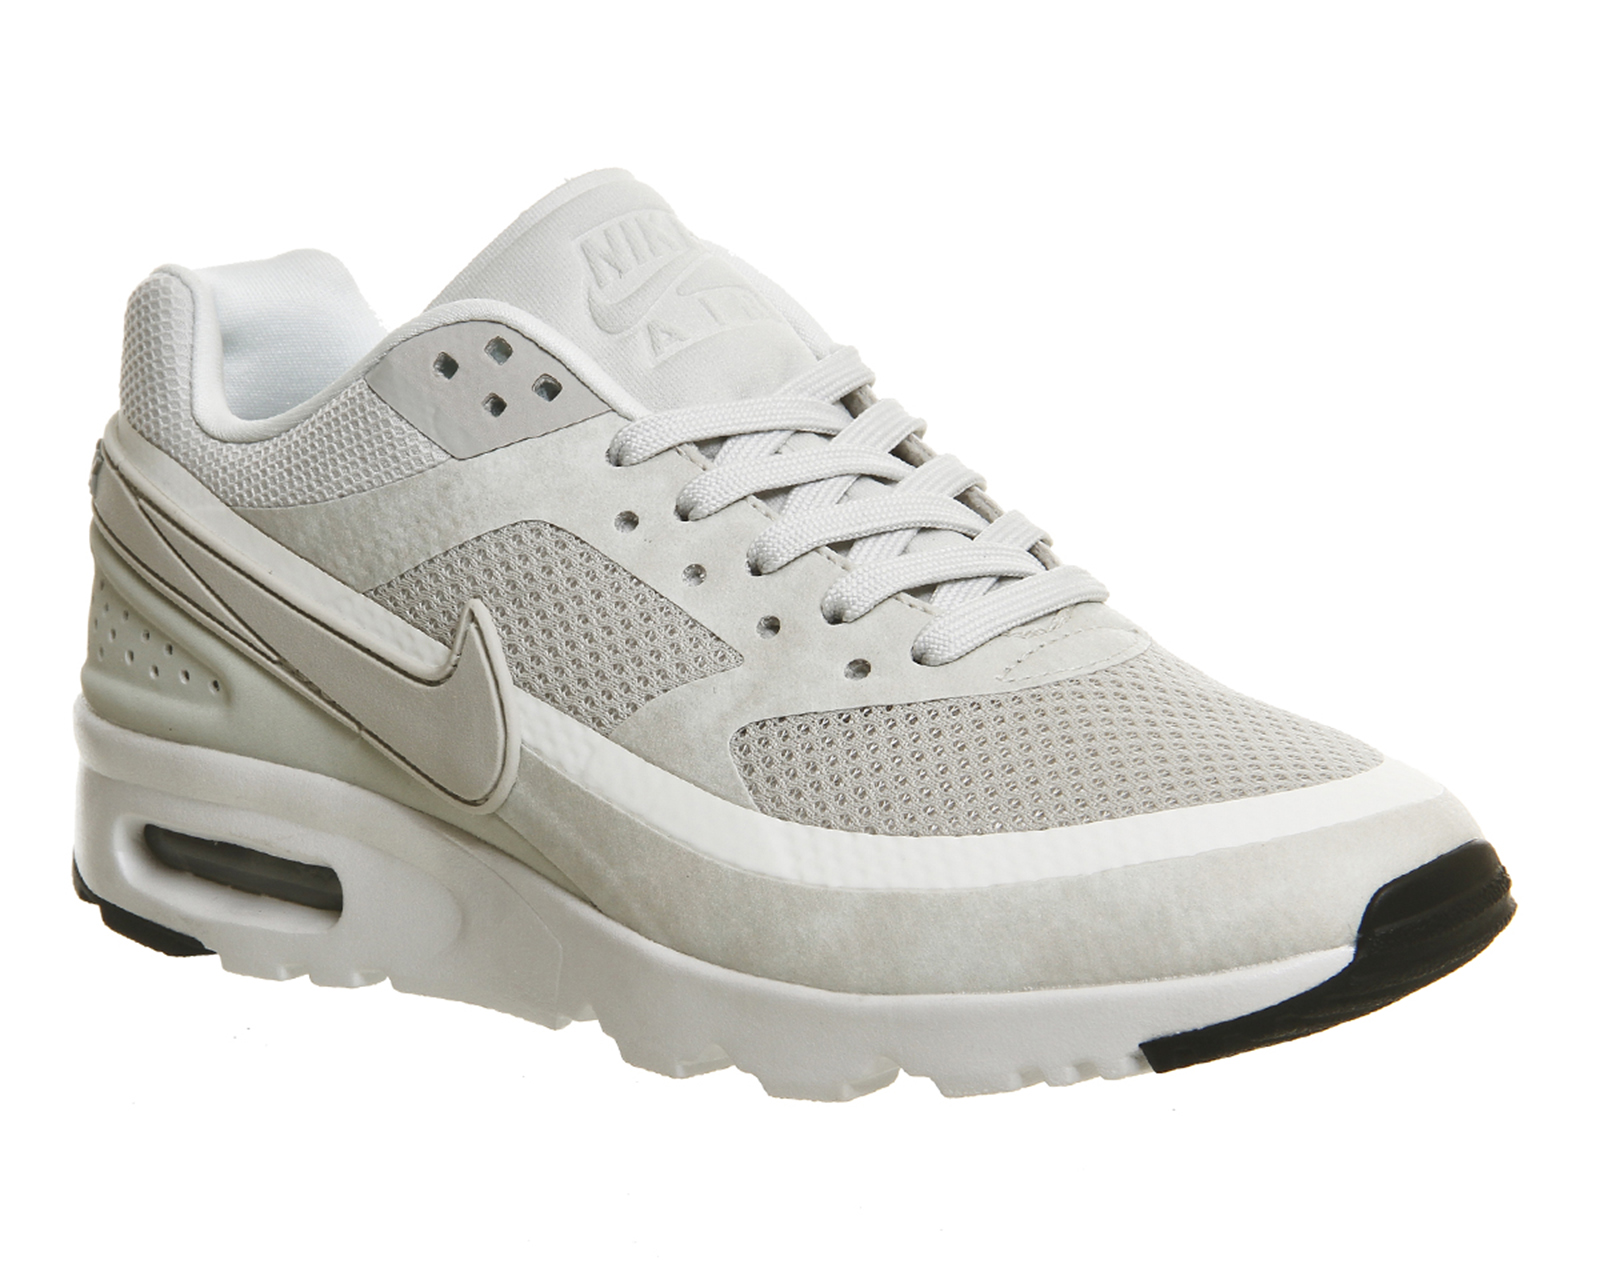 nike bw trainers online 746f0 38033